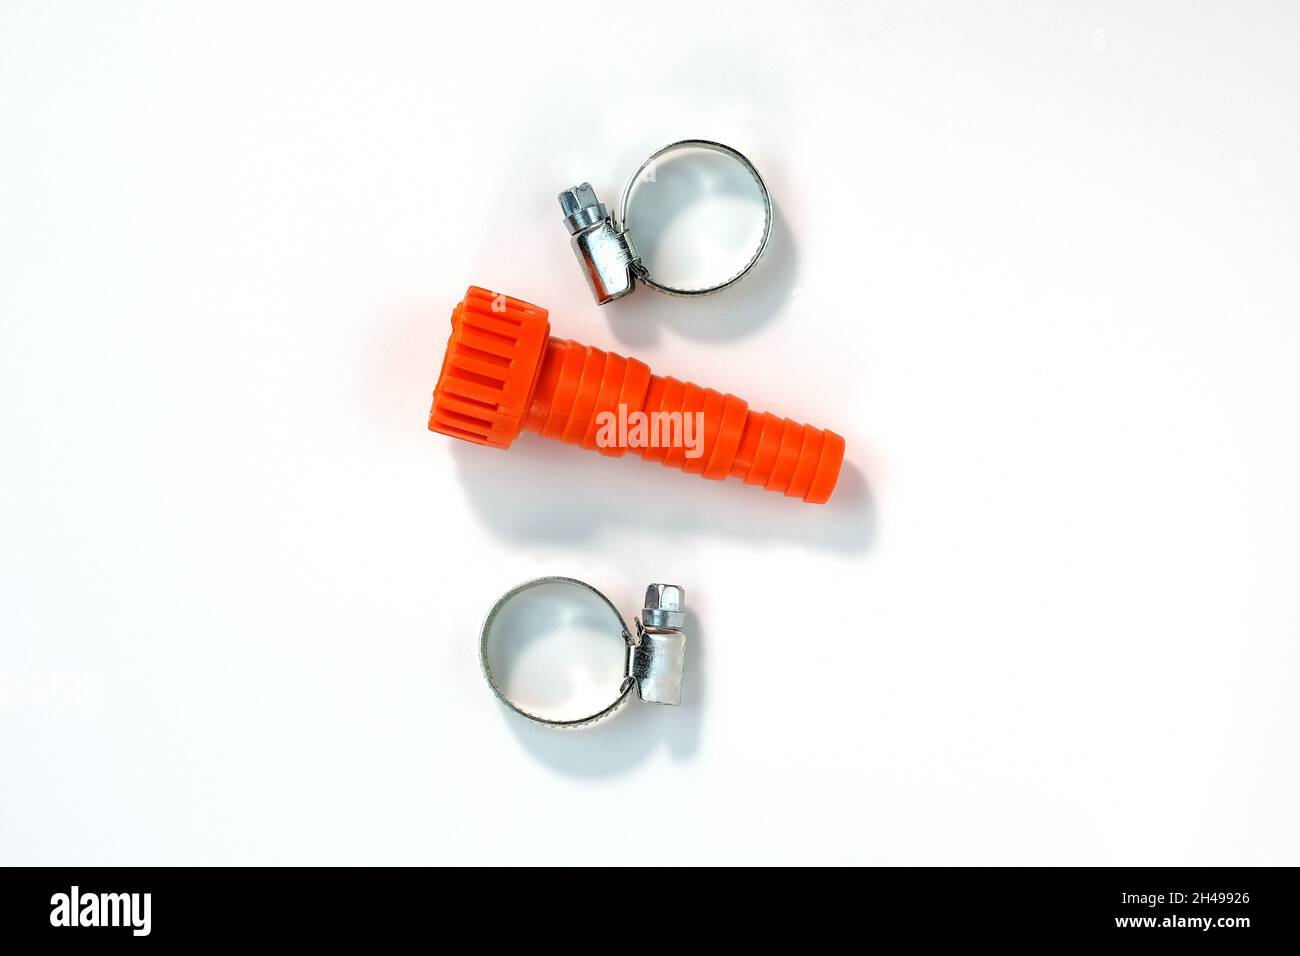 Fitting connector and metal clamp on a white background top view. Plastic orange fitting for a garden hose. Plastic hose connector and galvanized stee Stock Photo